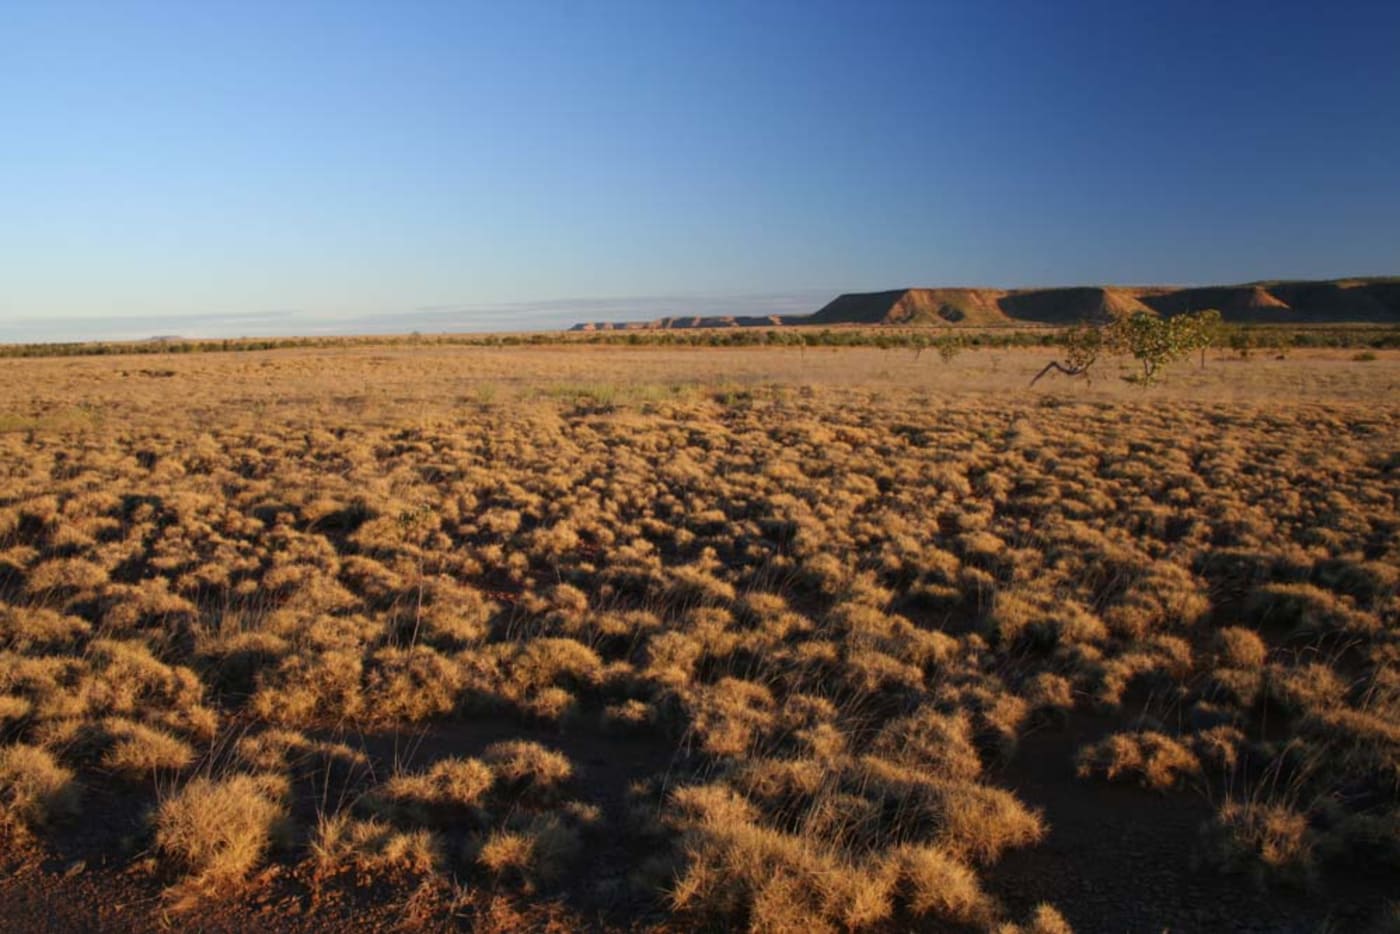 Sunset landscape in the central kimberley with spinifex grass and sandstone ridges